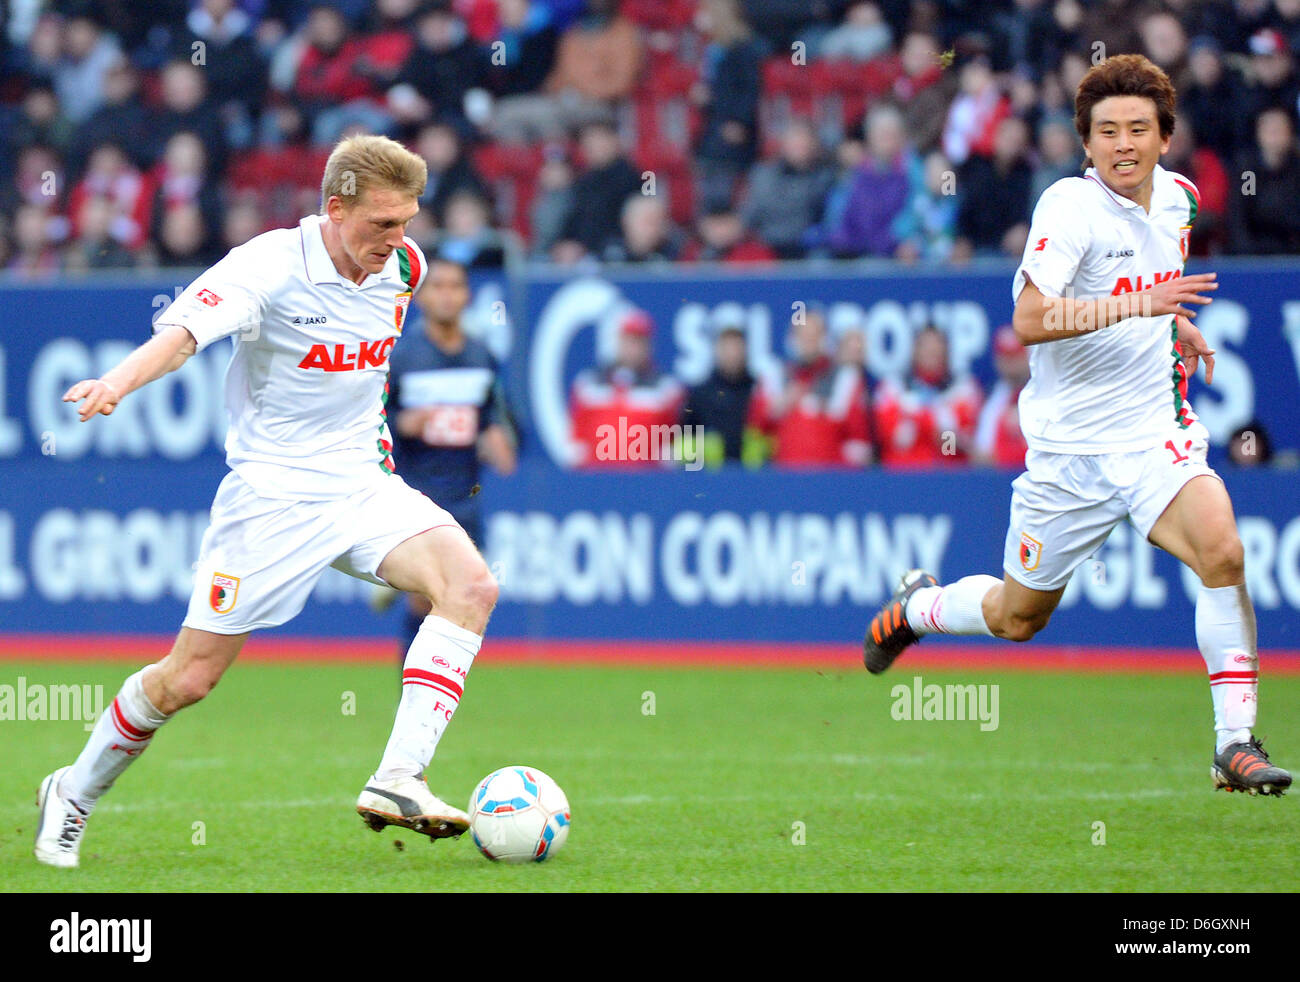 Augsburg's Axel Bellinghausen (L) runs with the ball as he passes his teammate Ja-Cheol Koo during the Bundesliga soccer match between FC Augsburg and Hertha BSC at the SGL-Arena in Augsburg, Germany, 25 February 2012.  Augsburg won the match 3-0. Photo: Stefan Puchner Stock Photo